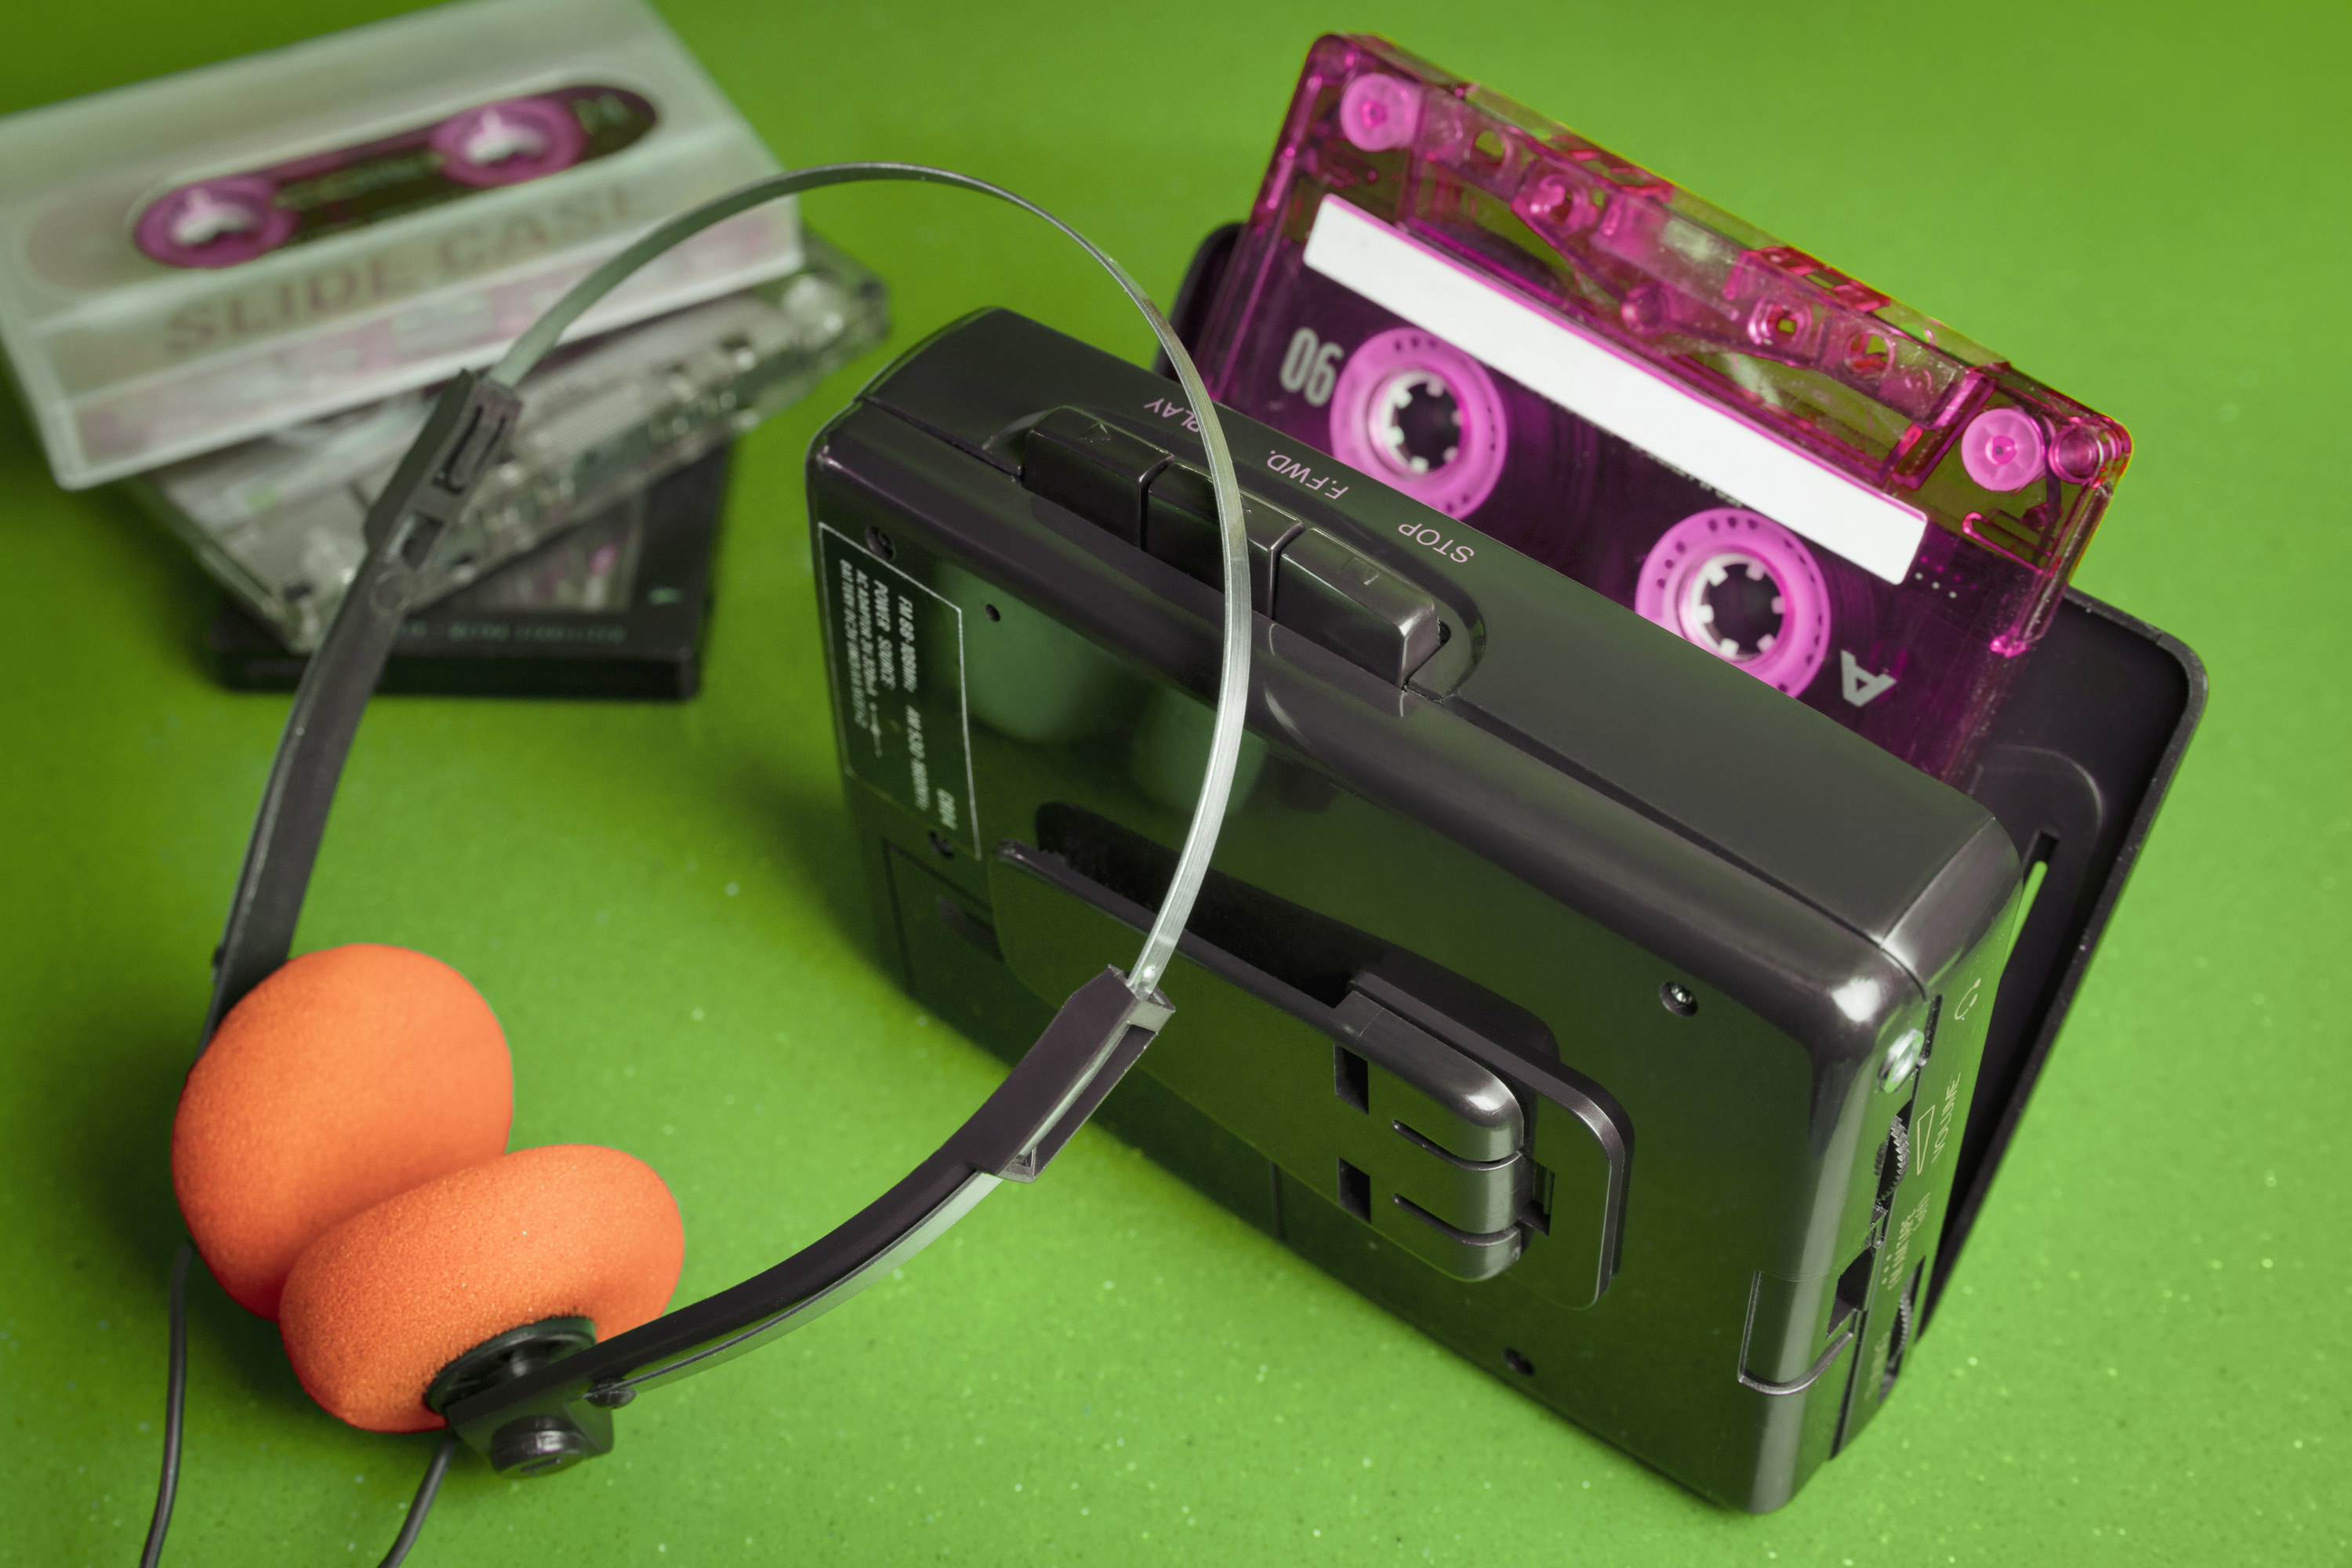 Cassette personal player music 80s with orange pads headphones